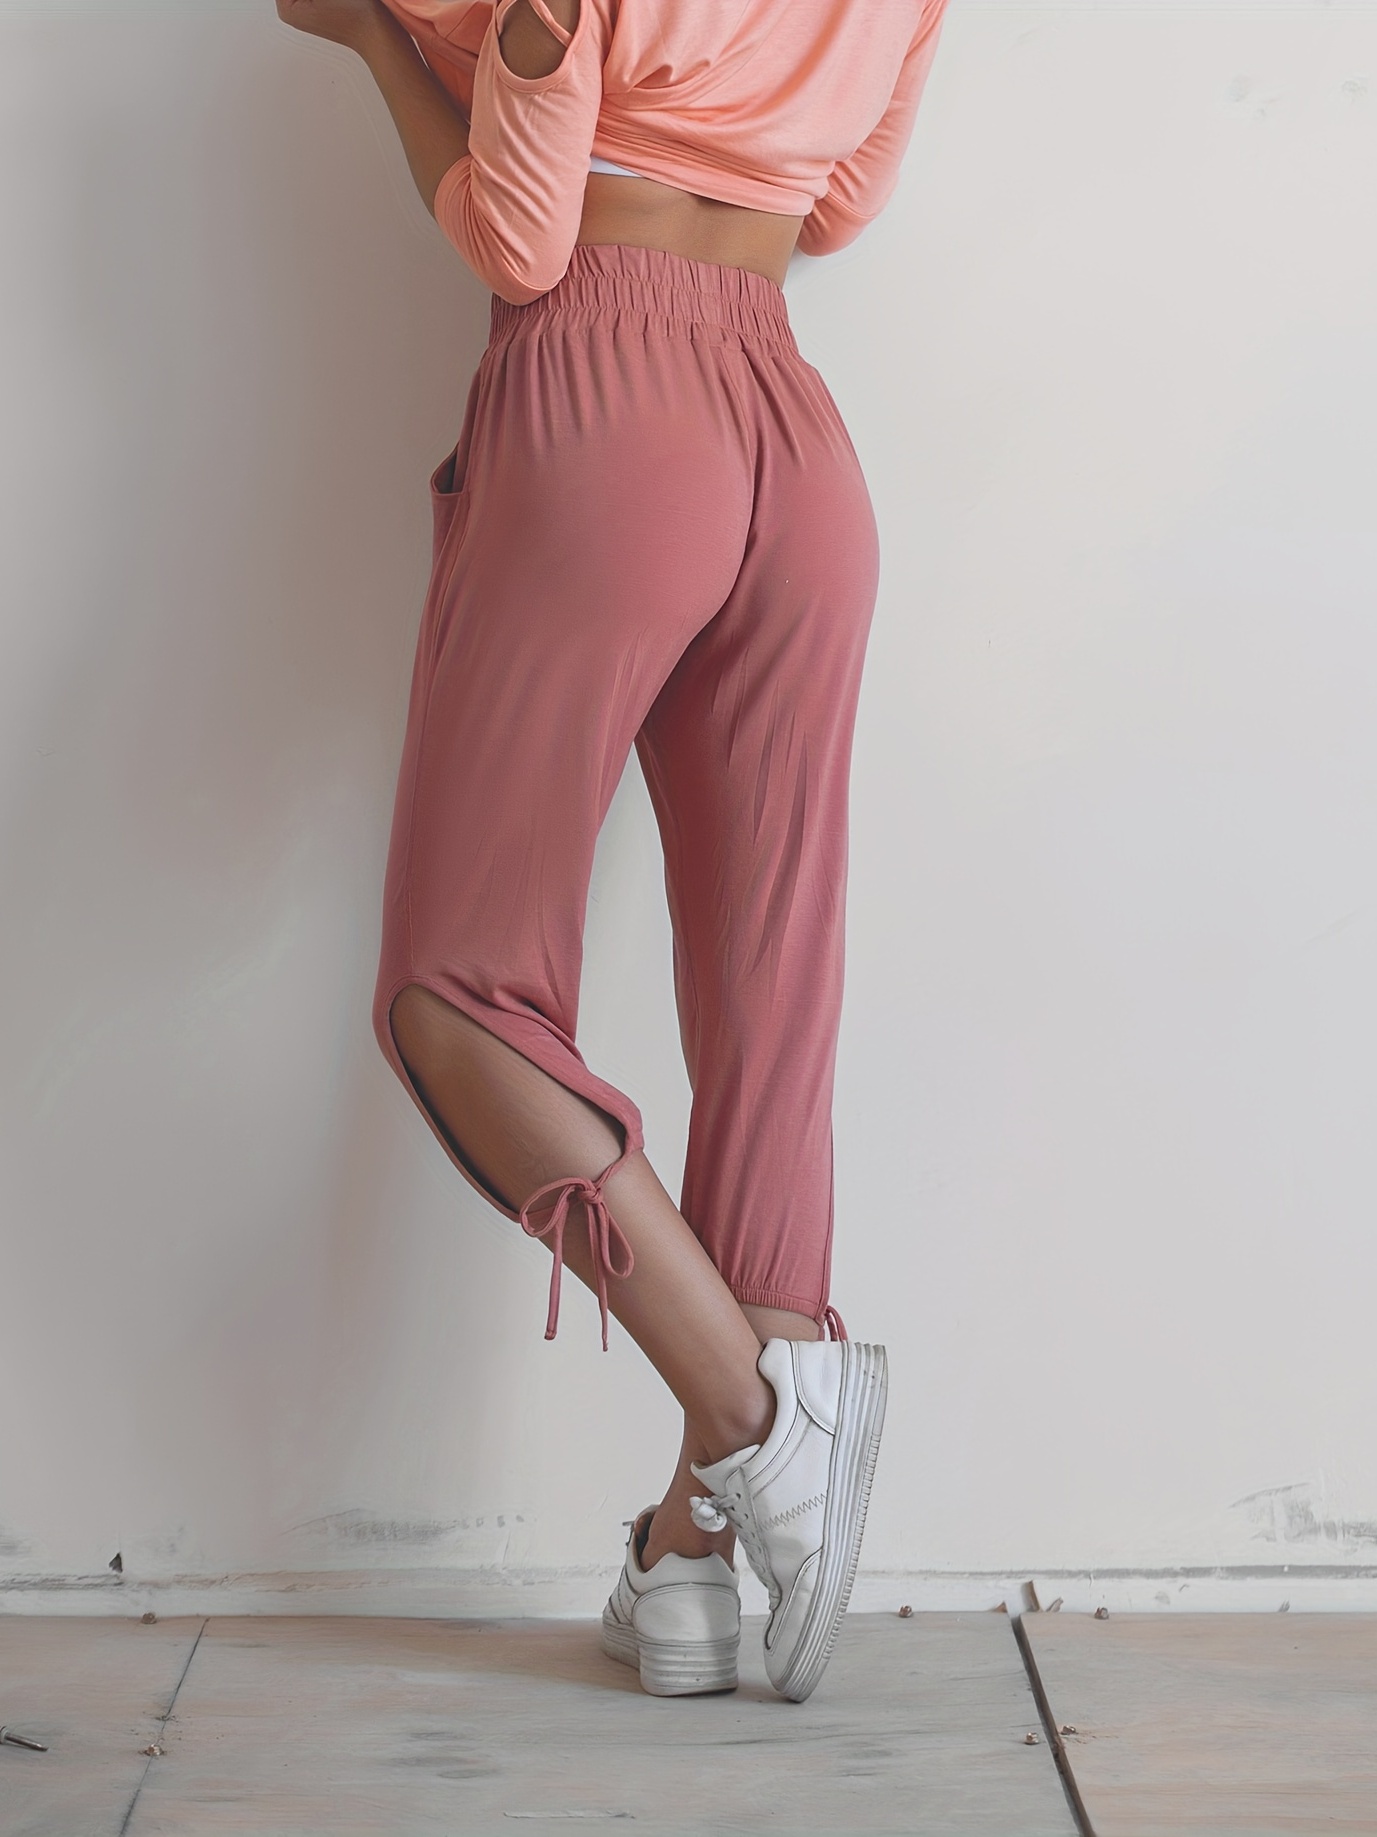 Women's Casual Pants: Loose Coral Pockets Capri Pants with Drawstring Tie  Side & Hollow Out for Yoga & Sports - Perfect for Any Occasion!